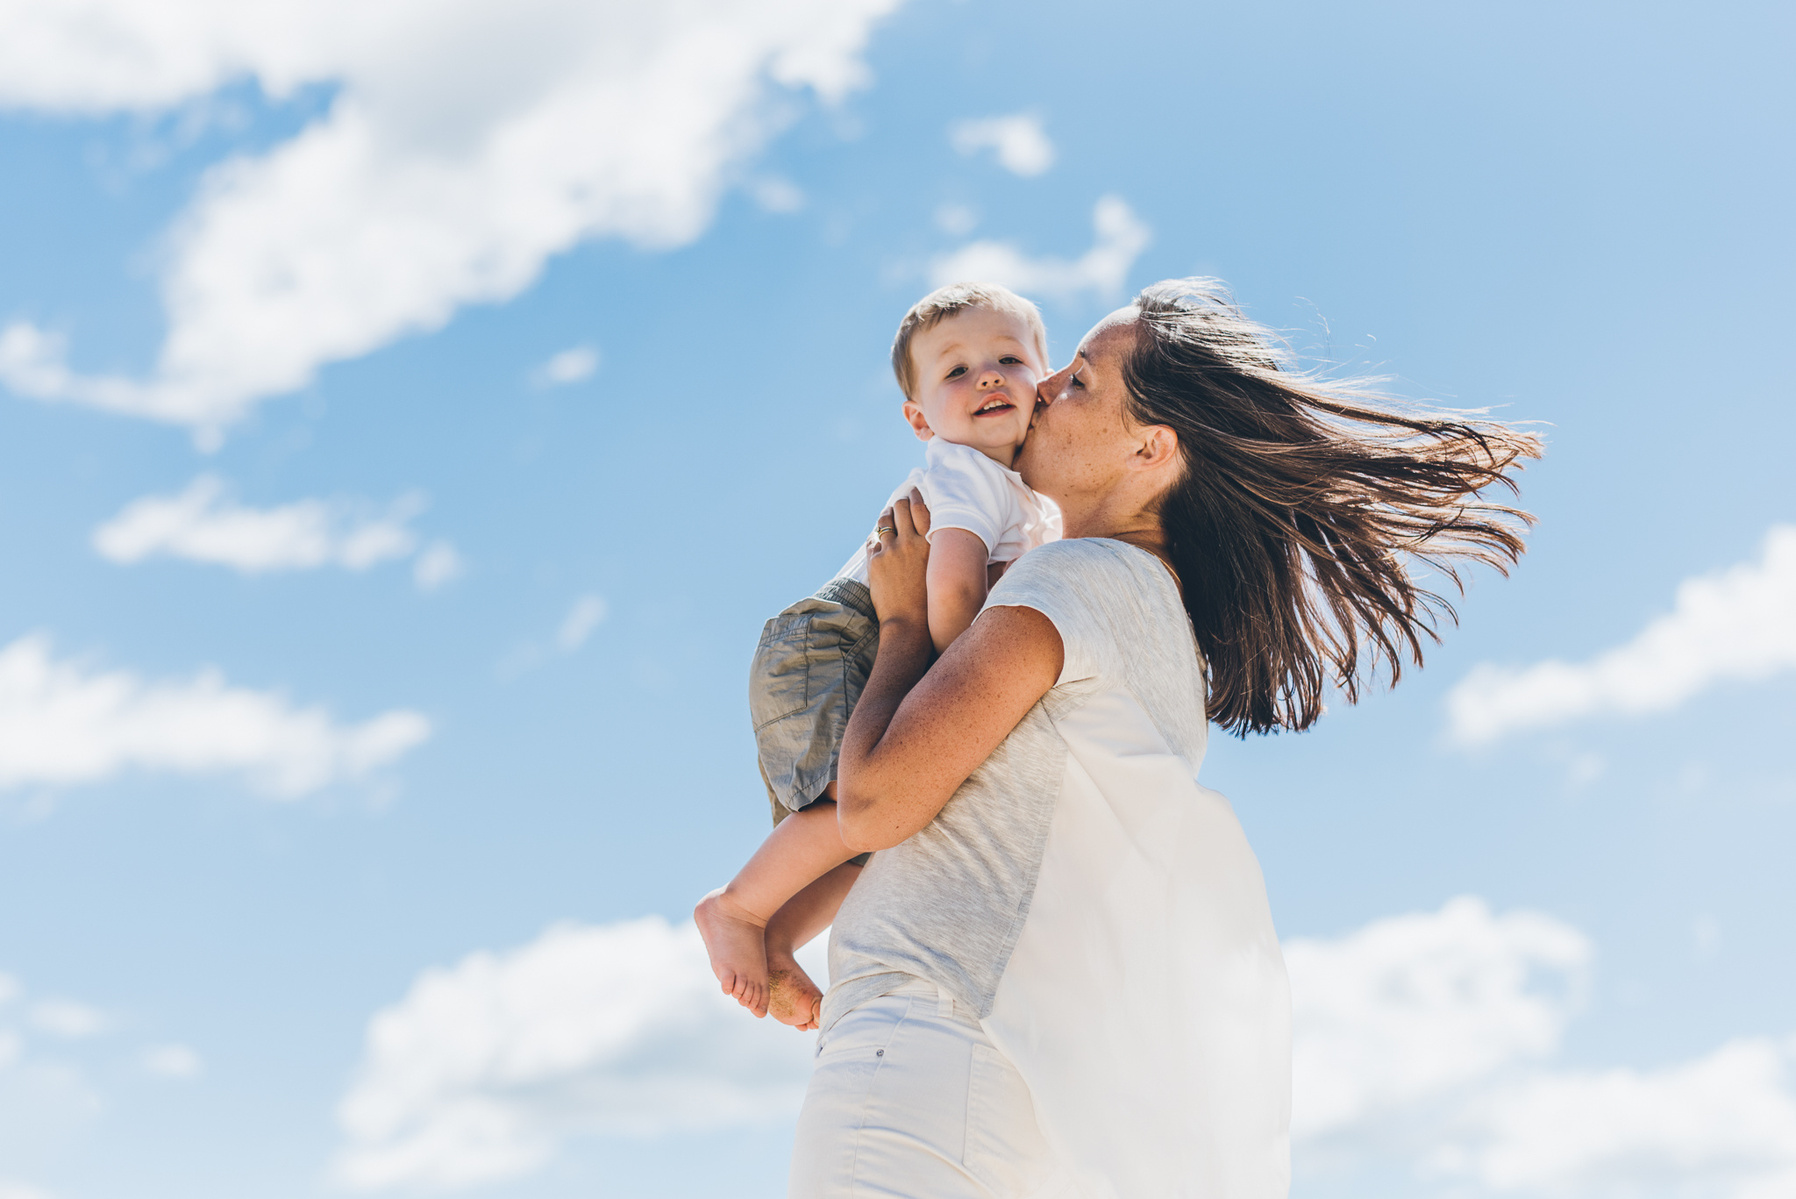 A mother lifts her son into the air and kisses his cheek while framed against a blue summer sky during their cape cod family photography session